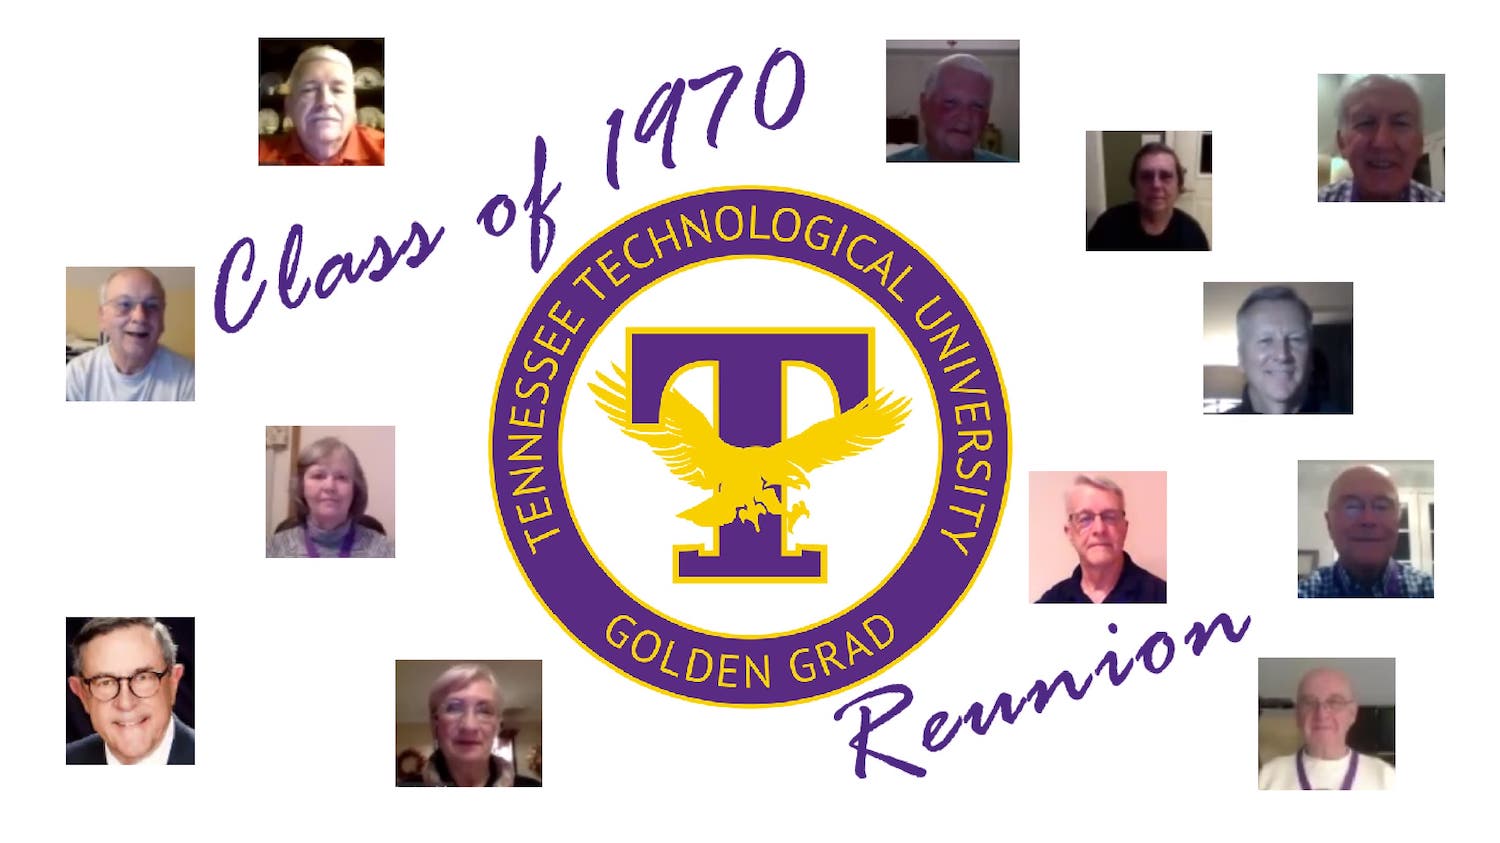 A collage of the Class of 1970 Golden Grad reunion attendees.